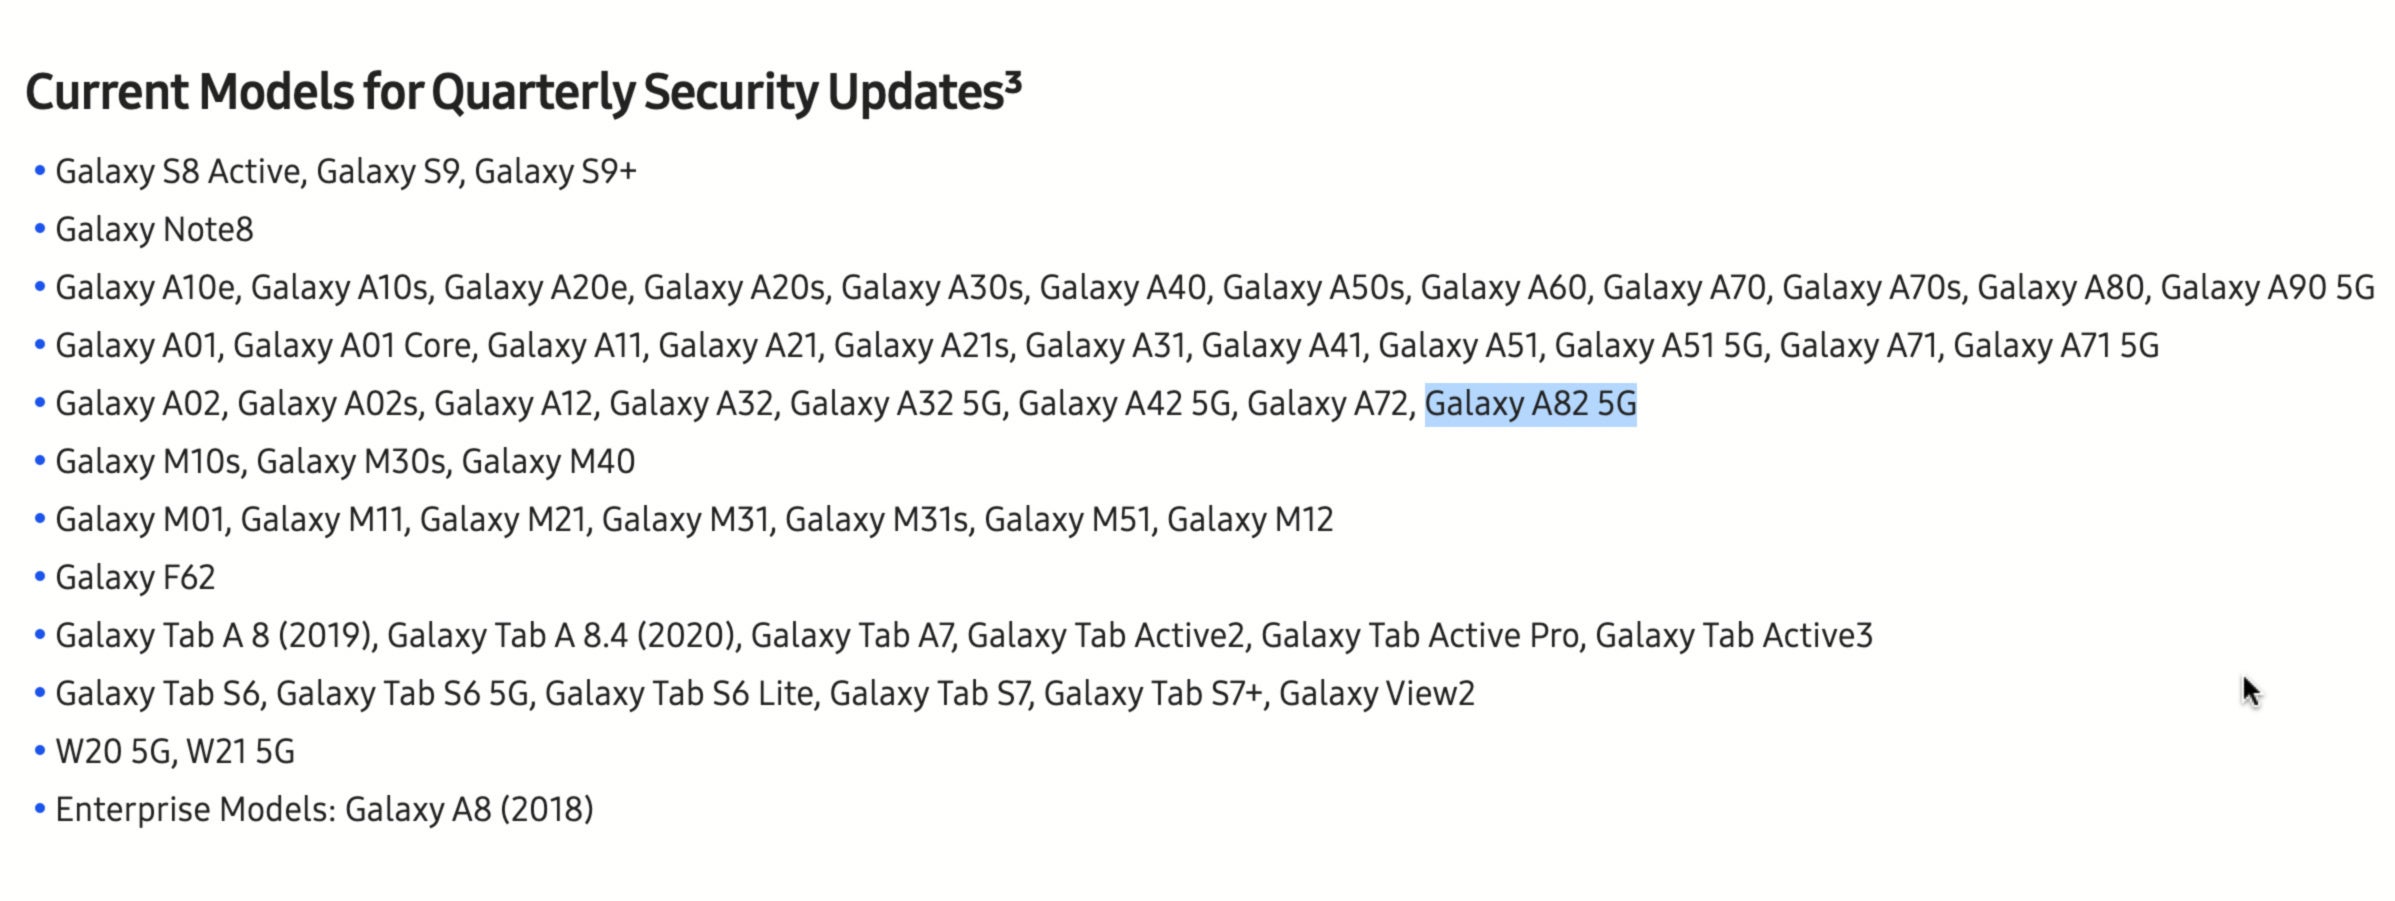 Samsung just mentioned the unreleased 'Galaxy A82 5G' on its website